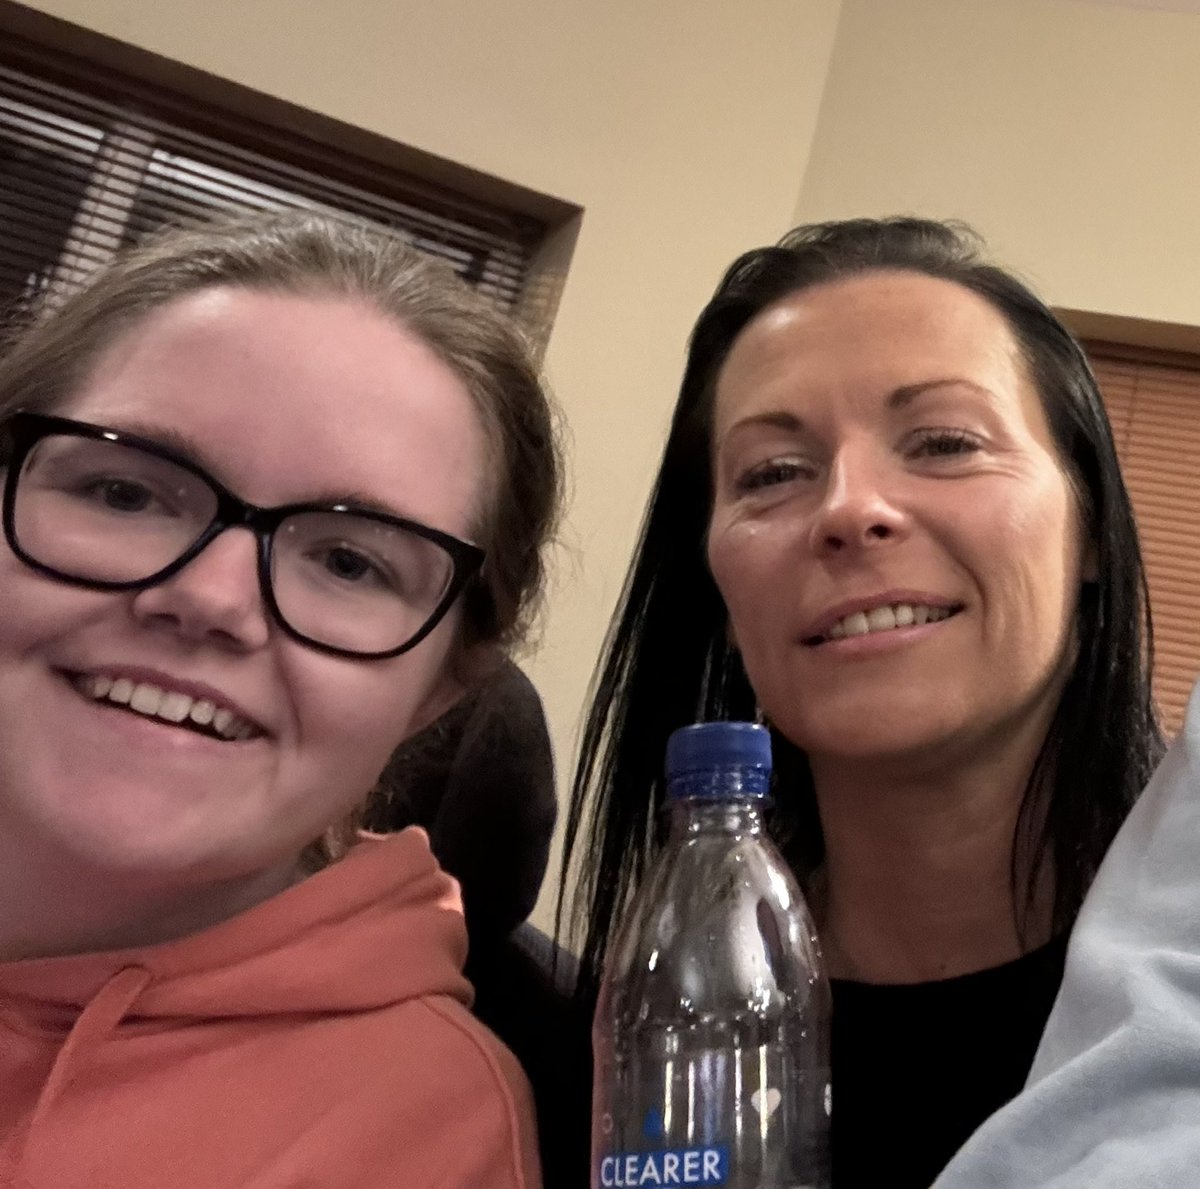 So lovely meeting paralympian, world number 1 Boccia gold medal winner @TaggartClaire this evening on behalf of @ClearerWater. Super interview and so inspirational. Thank you!
Many thanks also to the wonderful staff at the lovely Curran Court Hotel Larne. #waterthathelpspeople 💧